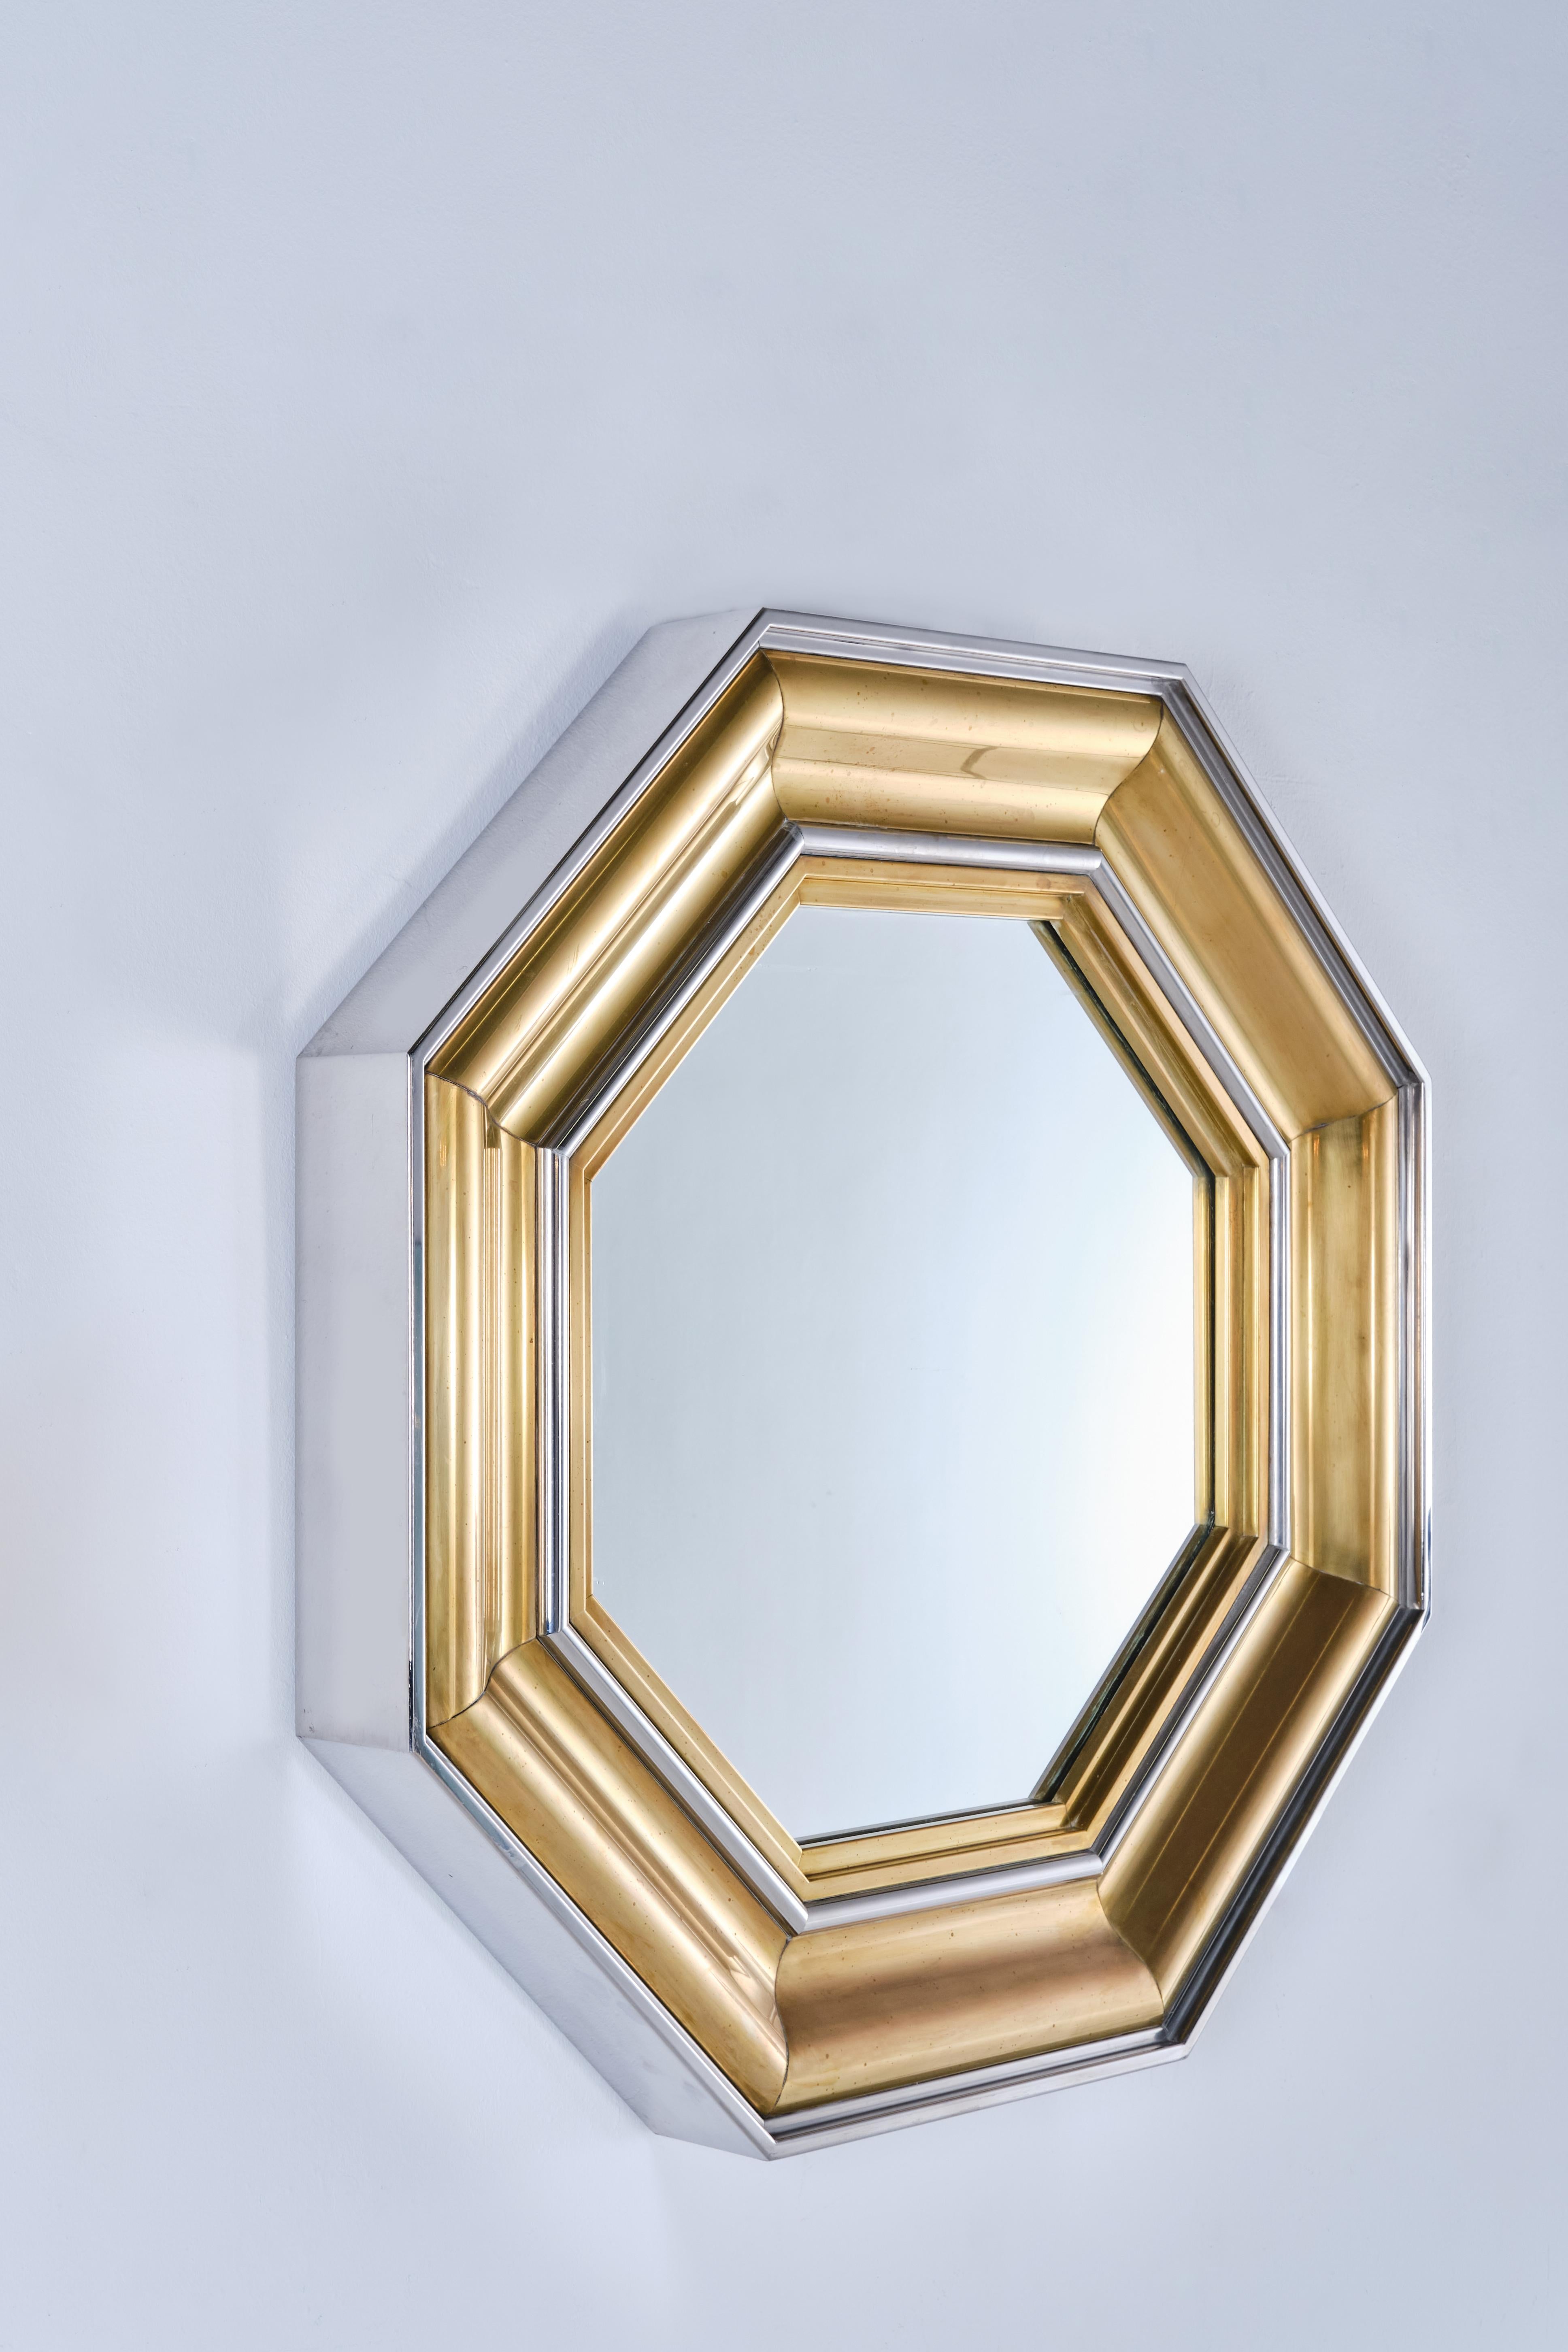 This wall mounted octagonal mirror was designed by Sandro Petti for Maison Jansen. Qintessentially 70s taste, this stylish mirror is a piece of fine craftsmanship for alternating stepped layers of brass and chrome and will make the difference in any